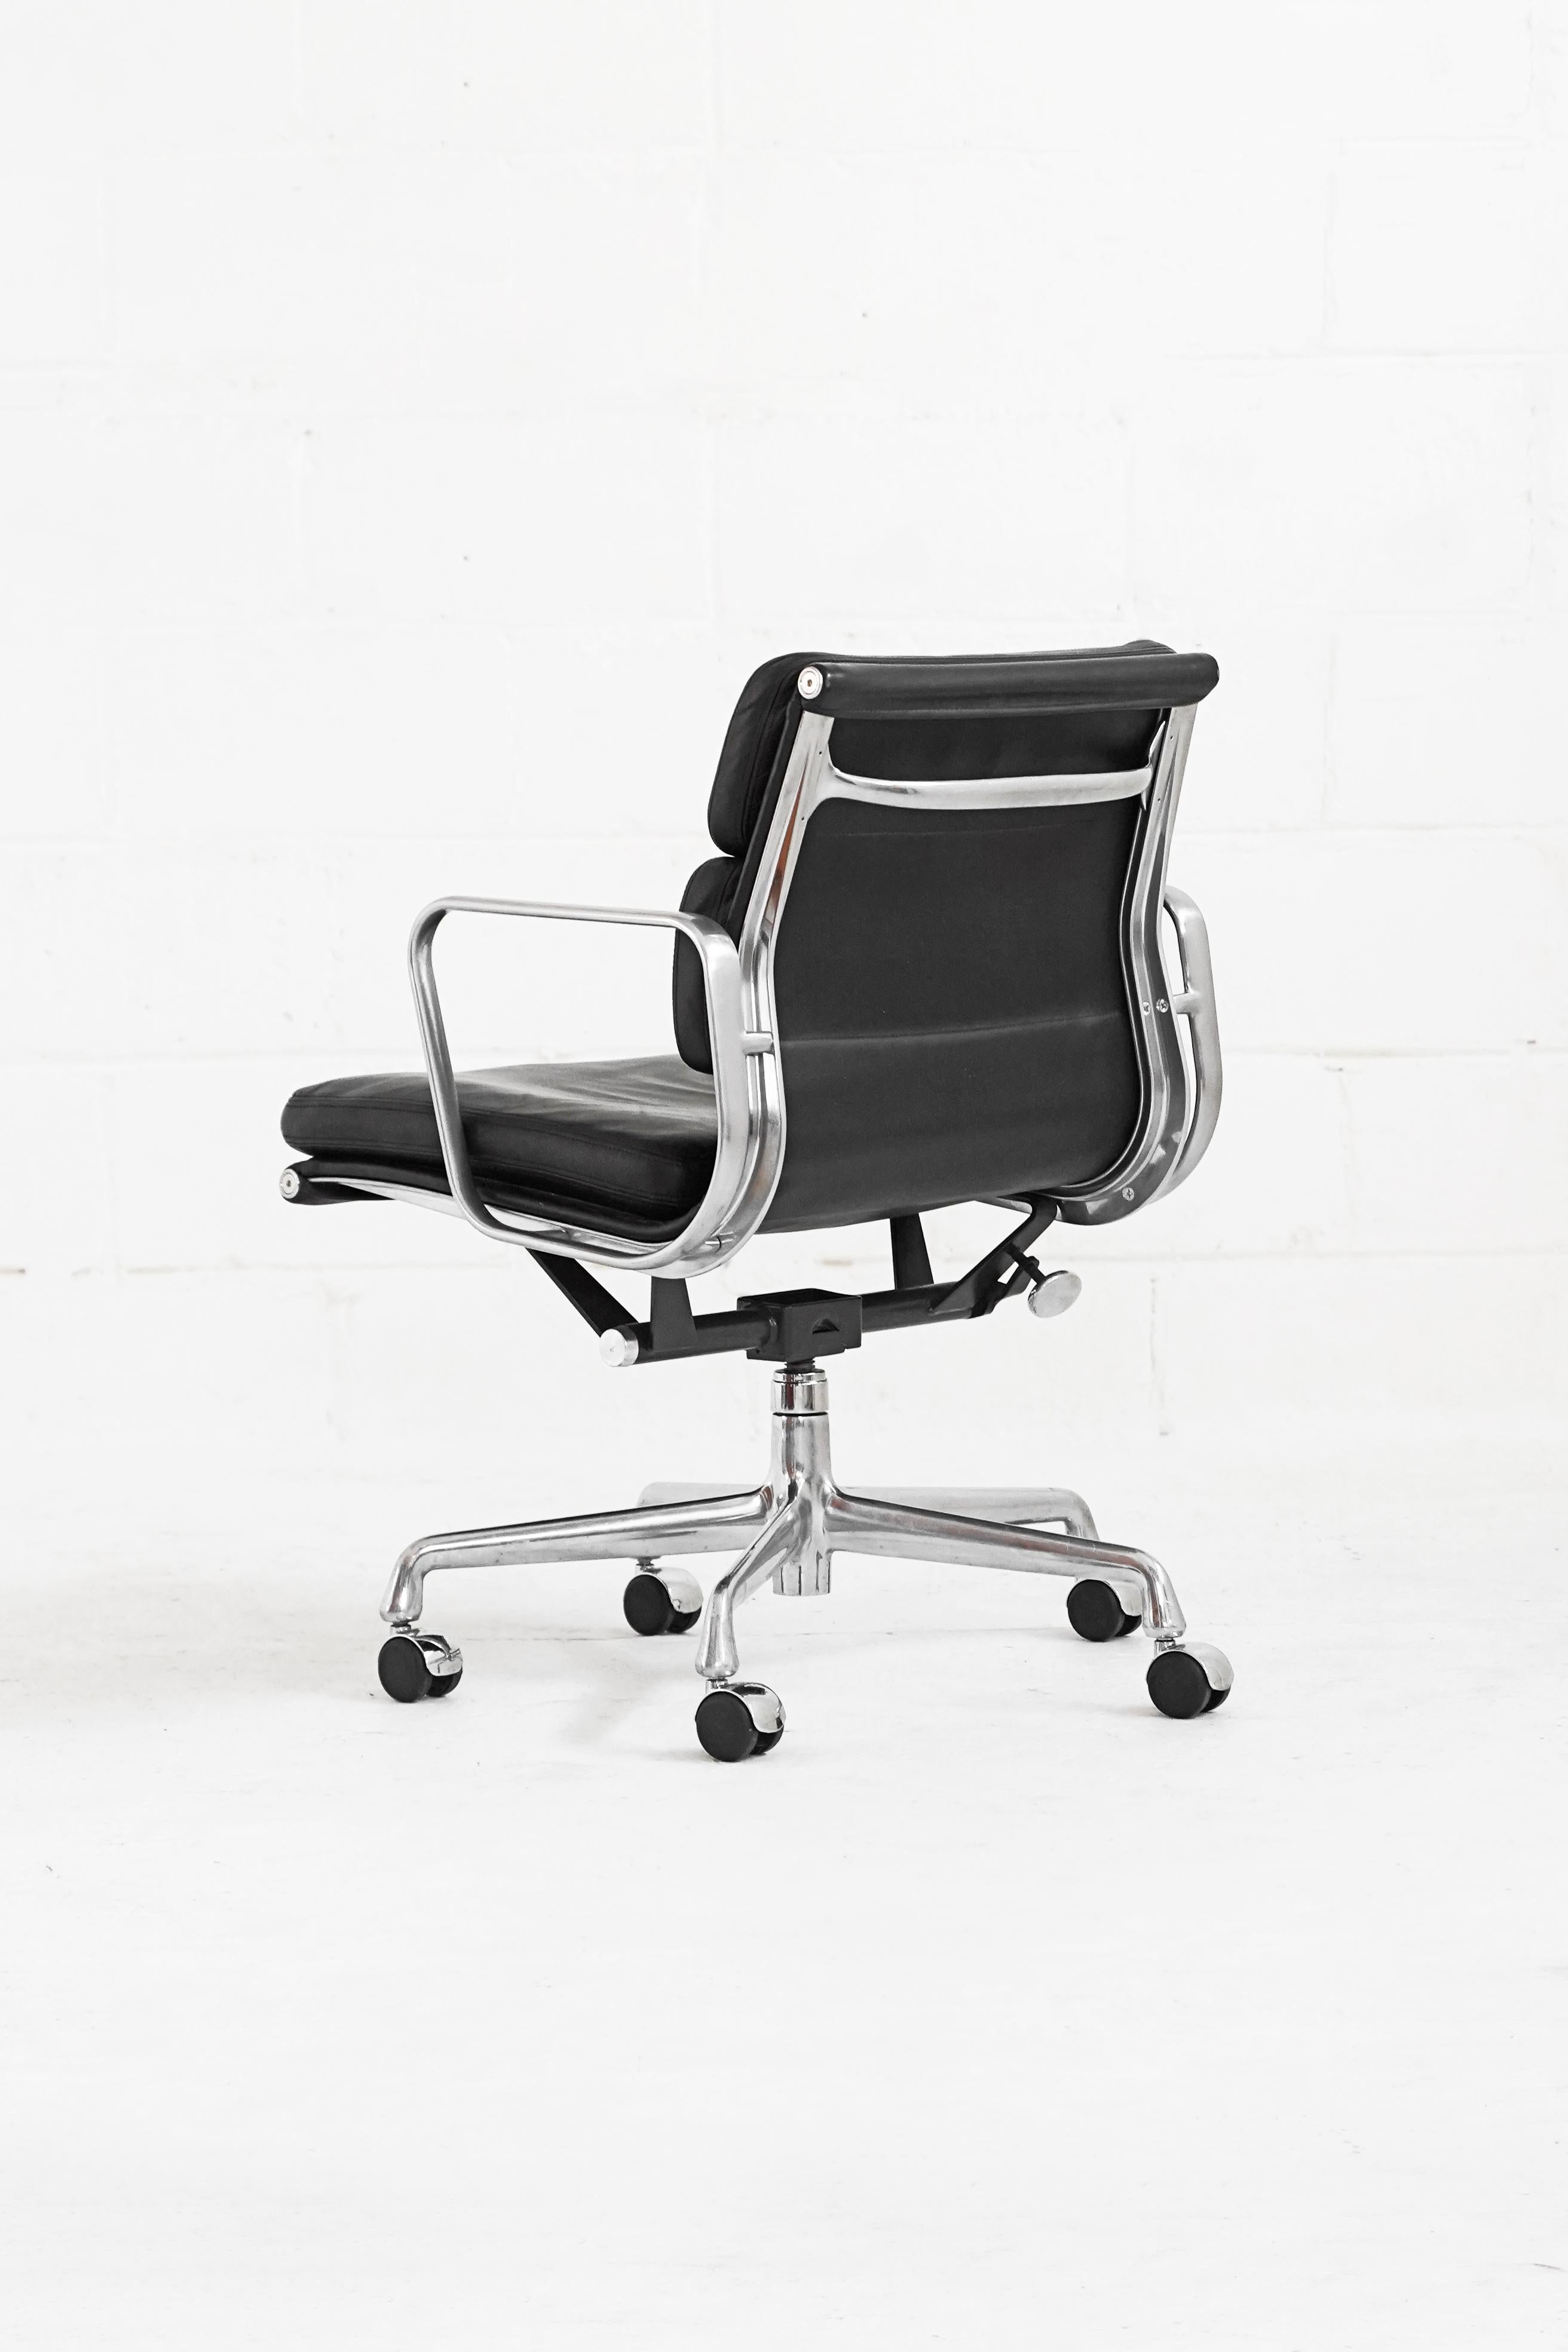 2000 - 2008 production. Gorgeous original black Herman Miller leather, soft and plush to the touch. Manual height adjustment (20